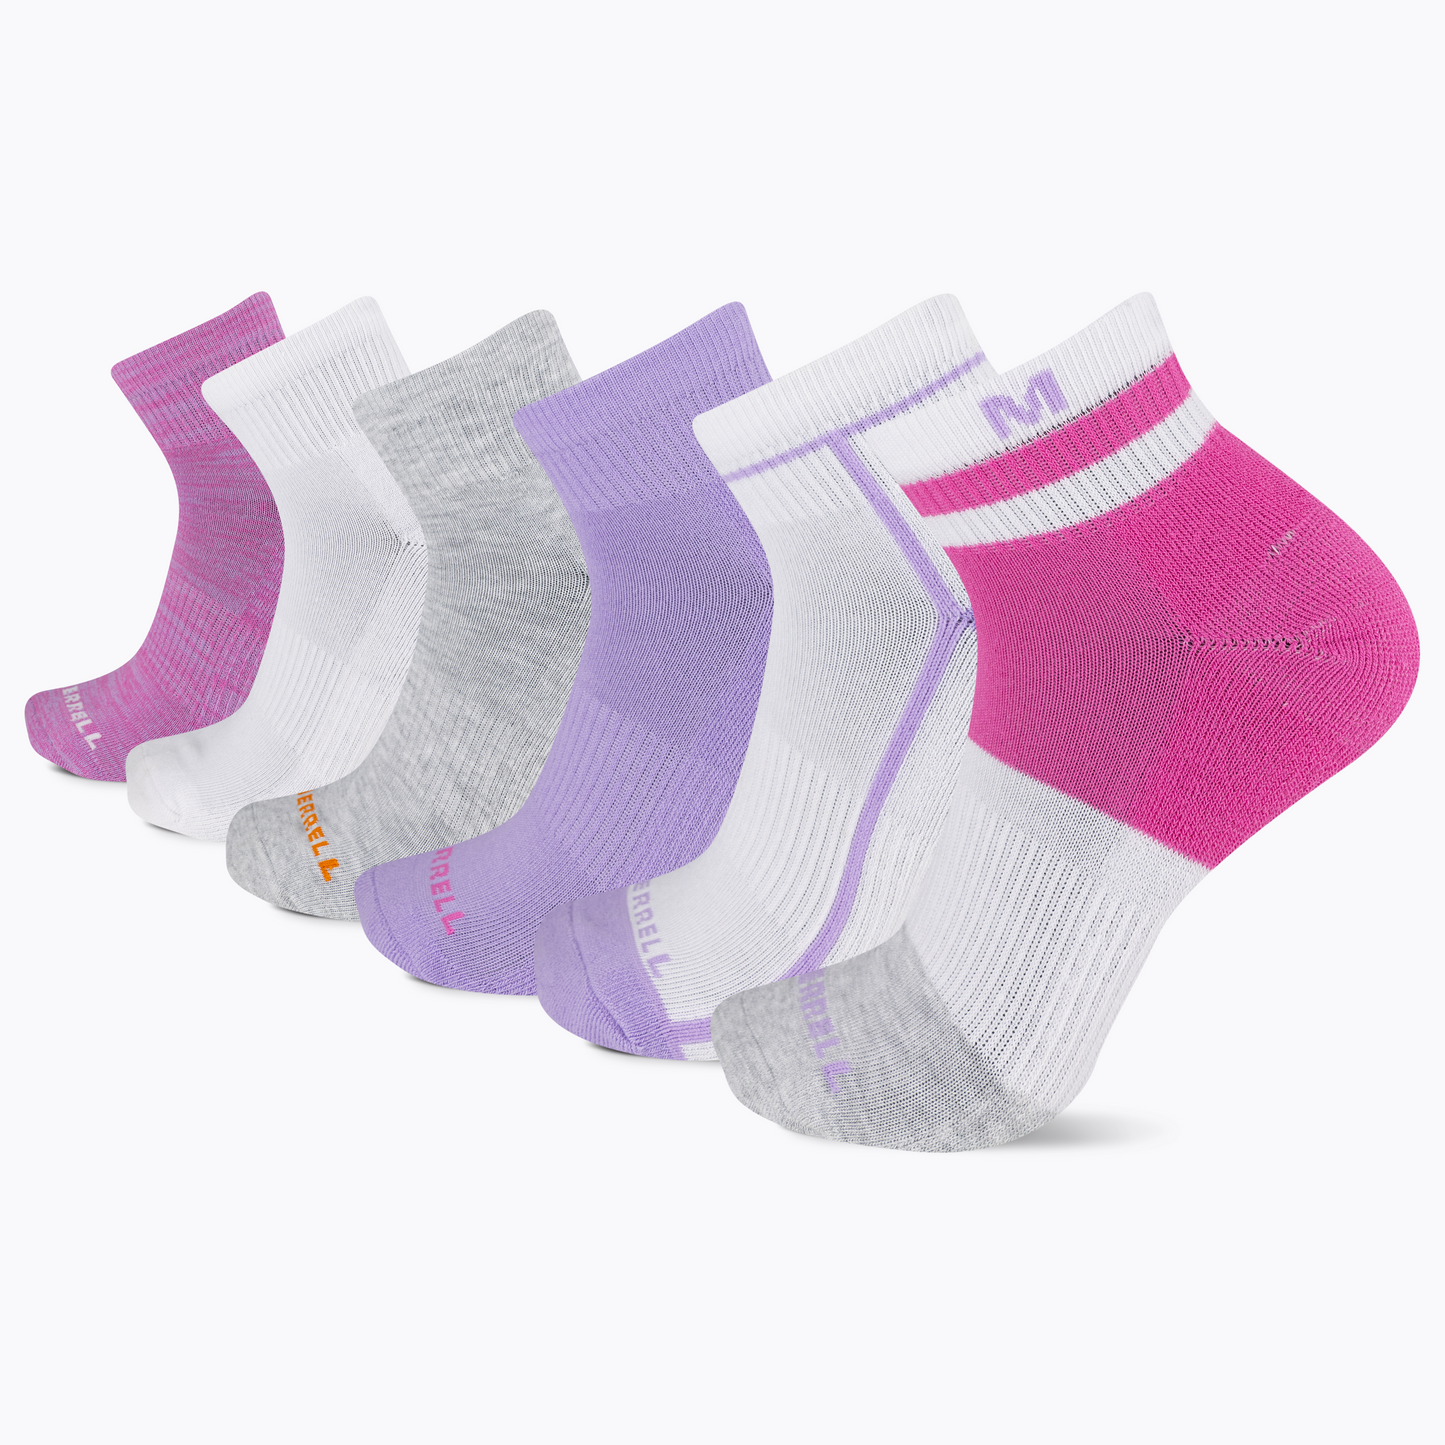 Recycled Cushioned Quarter Sock 6pk Pink Assorted